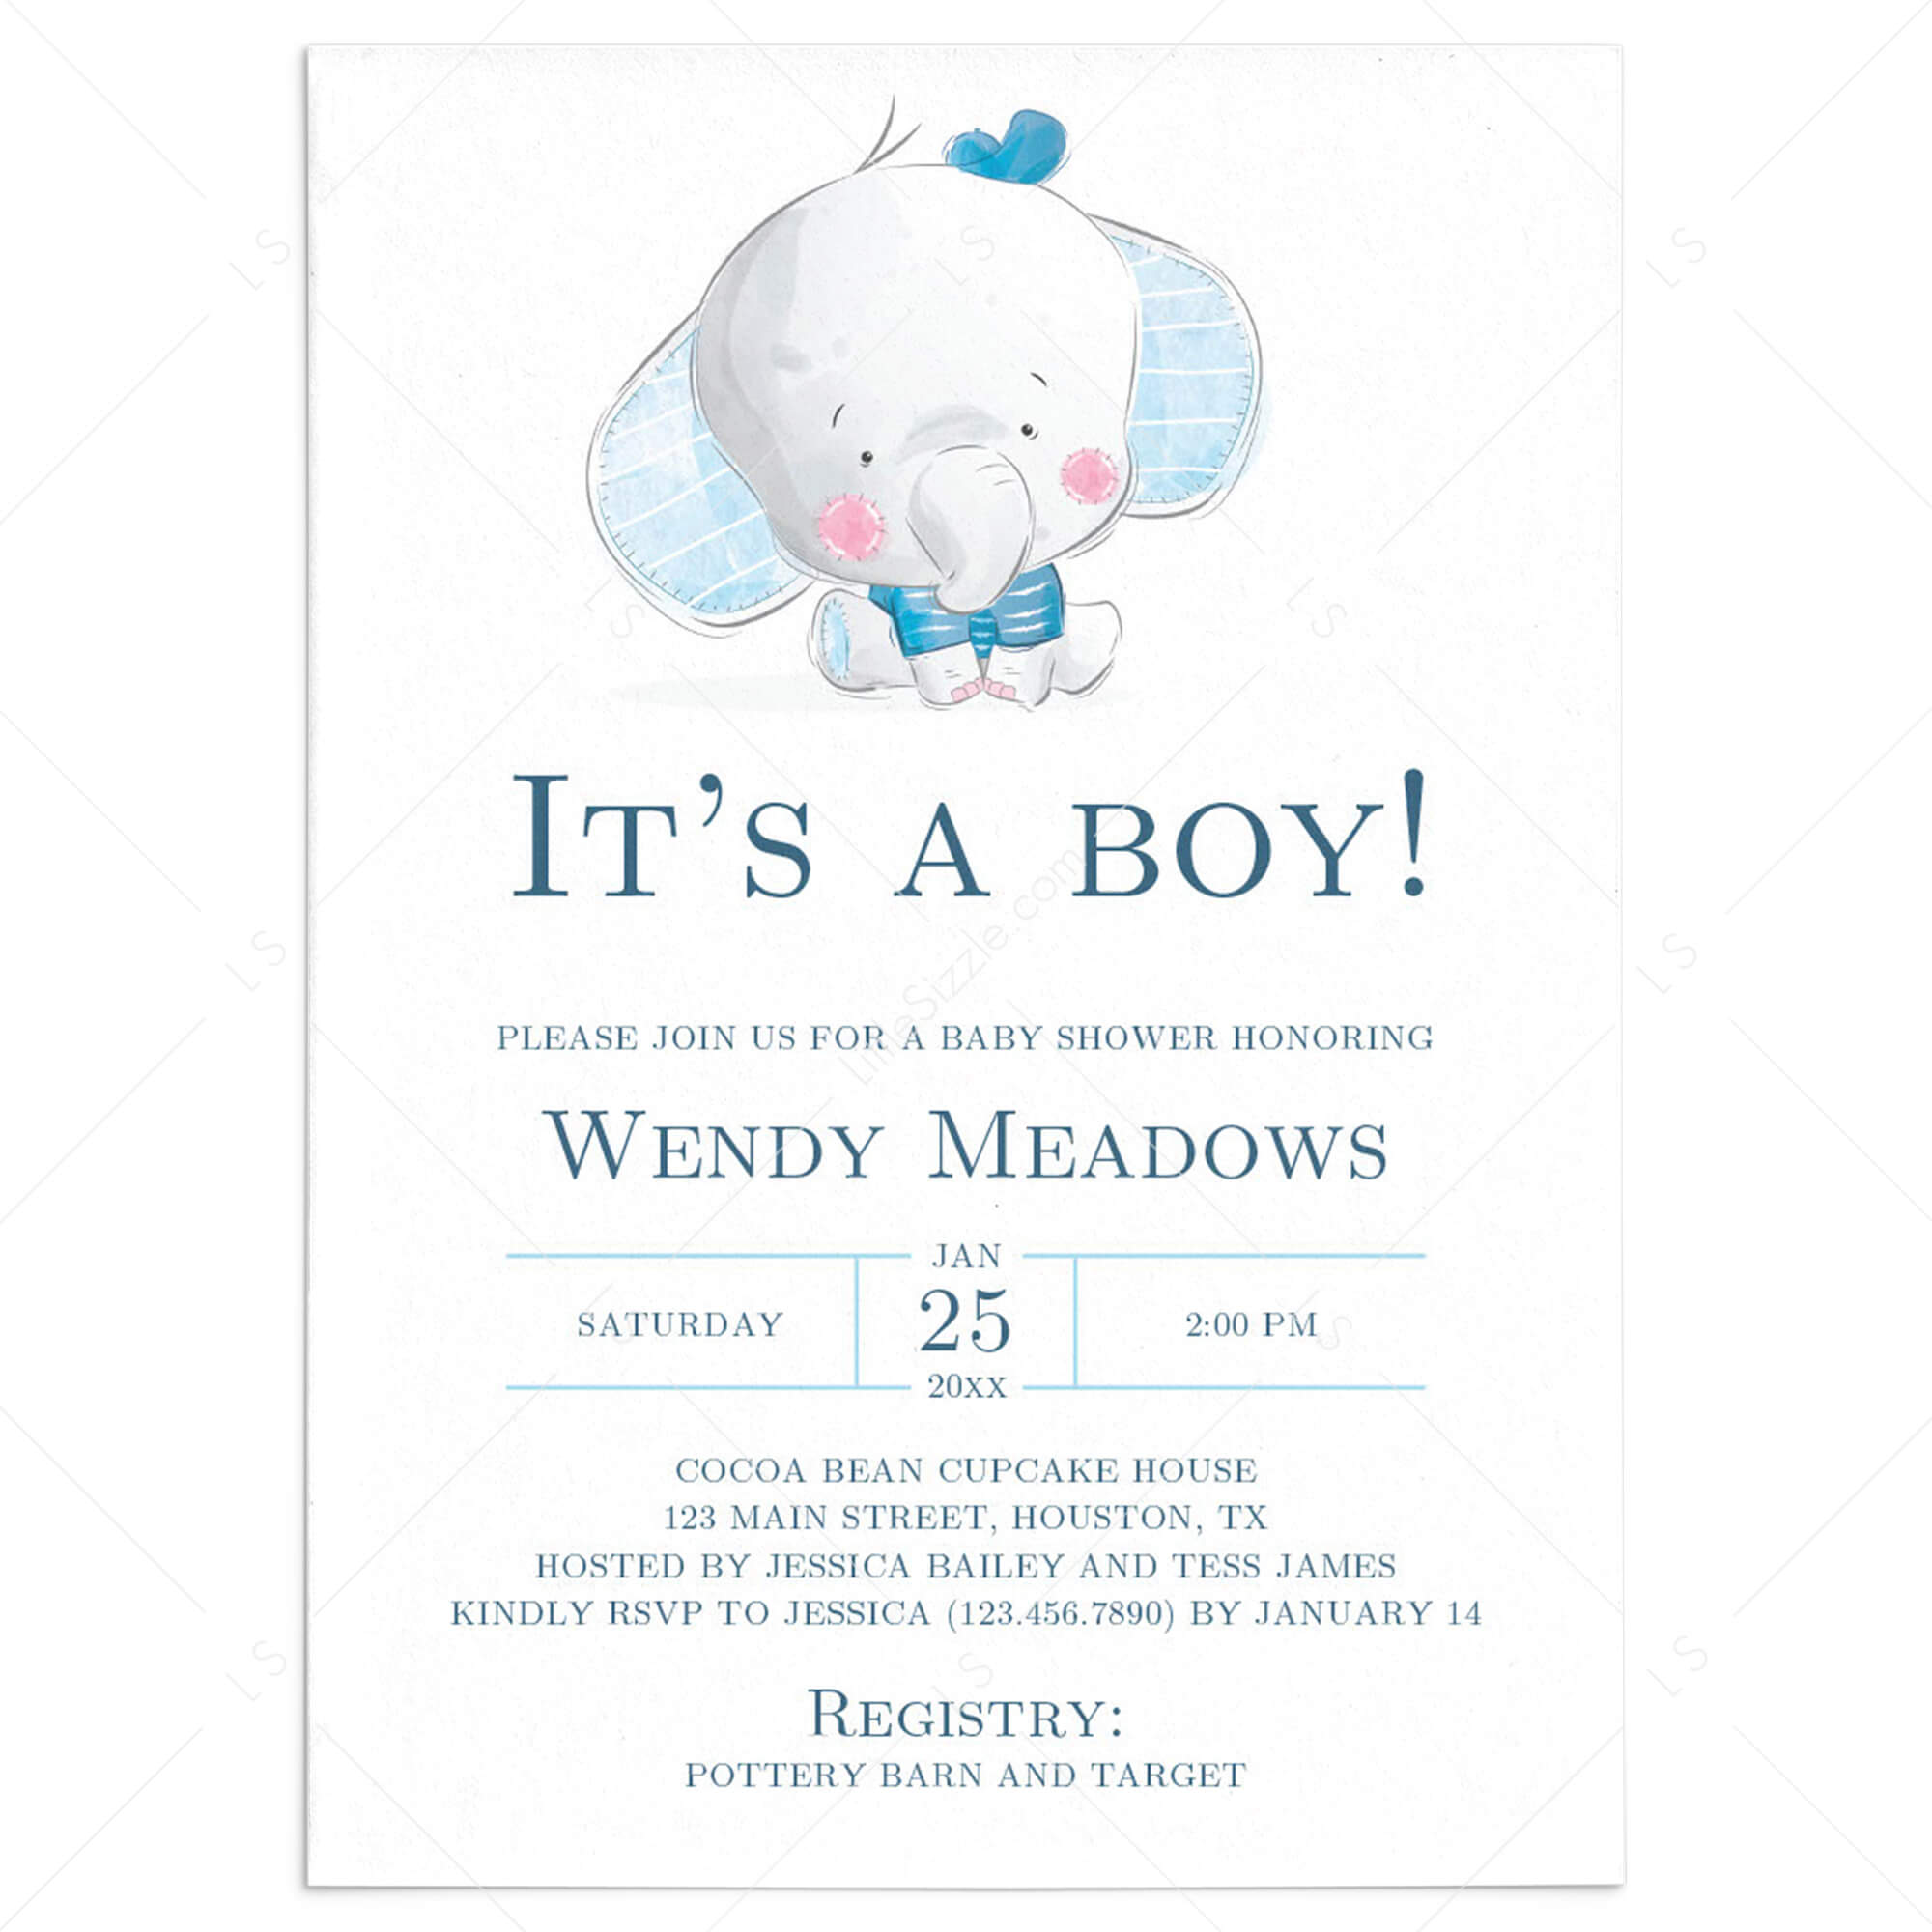 Baby Products Online - Baby Shower Invitation Set - 25 Fill-in-the